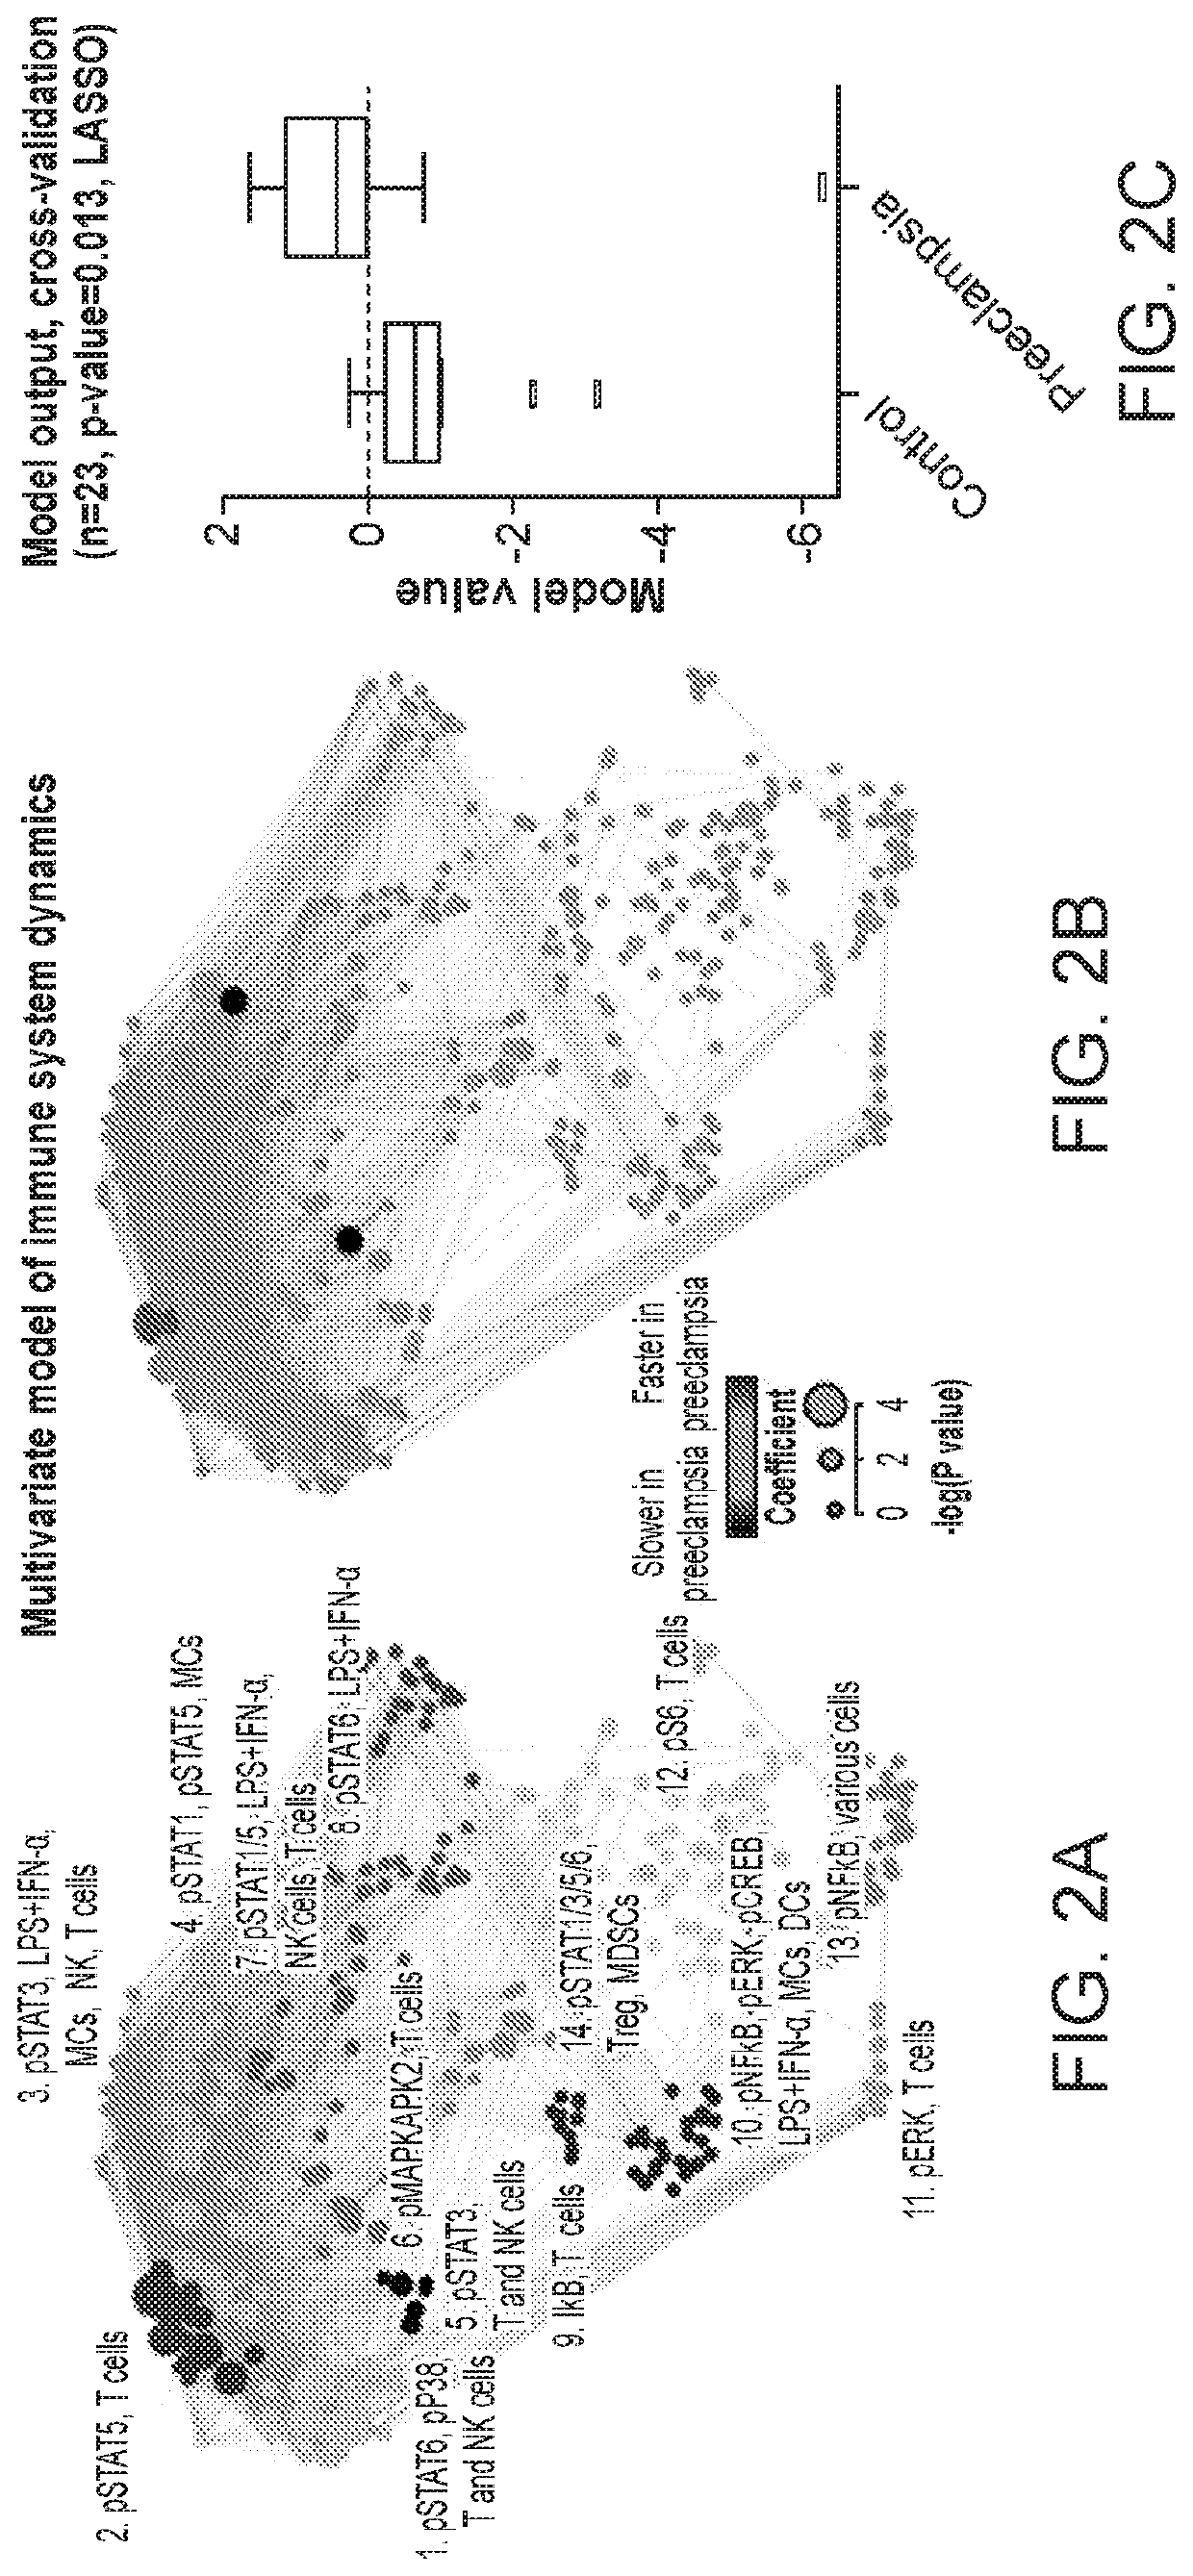 Compositions and methods of prognosis and classification for preeclampsia